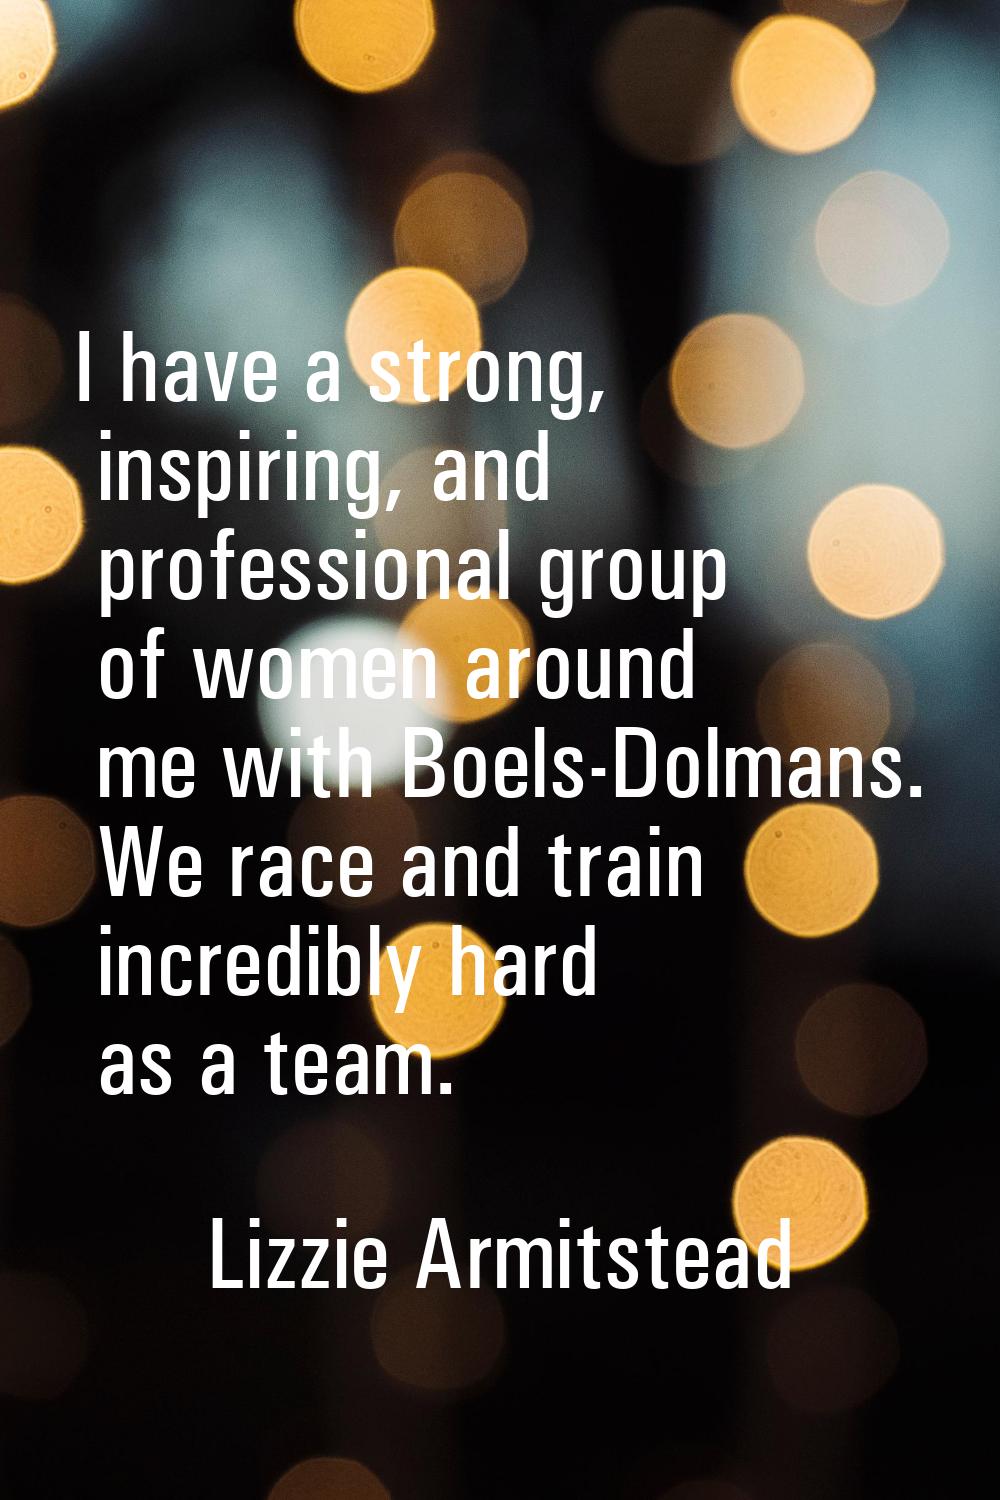 I have a strong, inspiring, and professional group of women around me with Boels-Dolmans. We race a